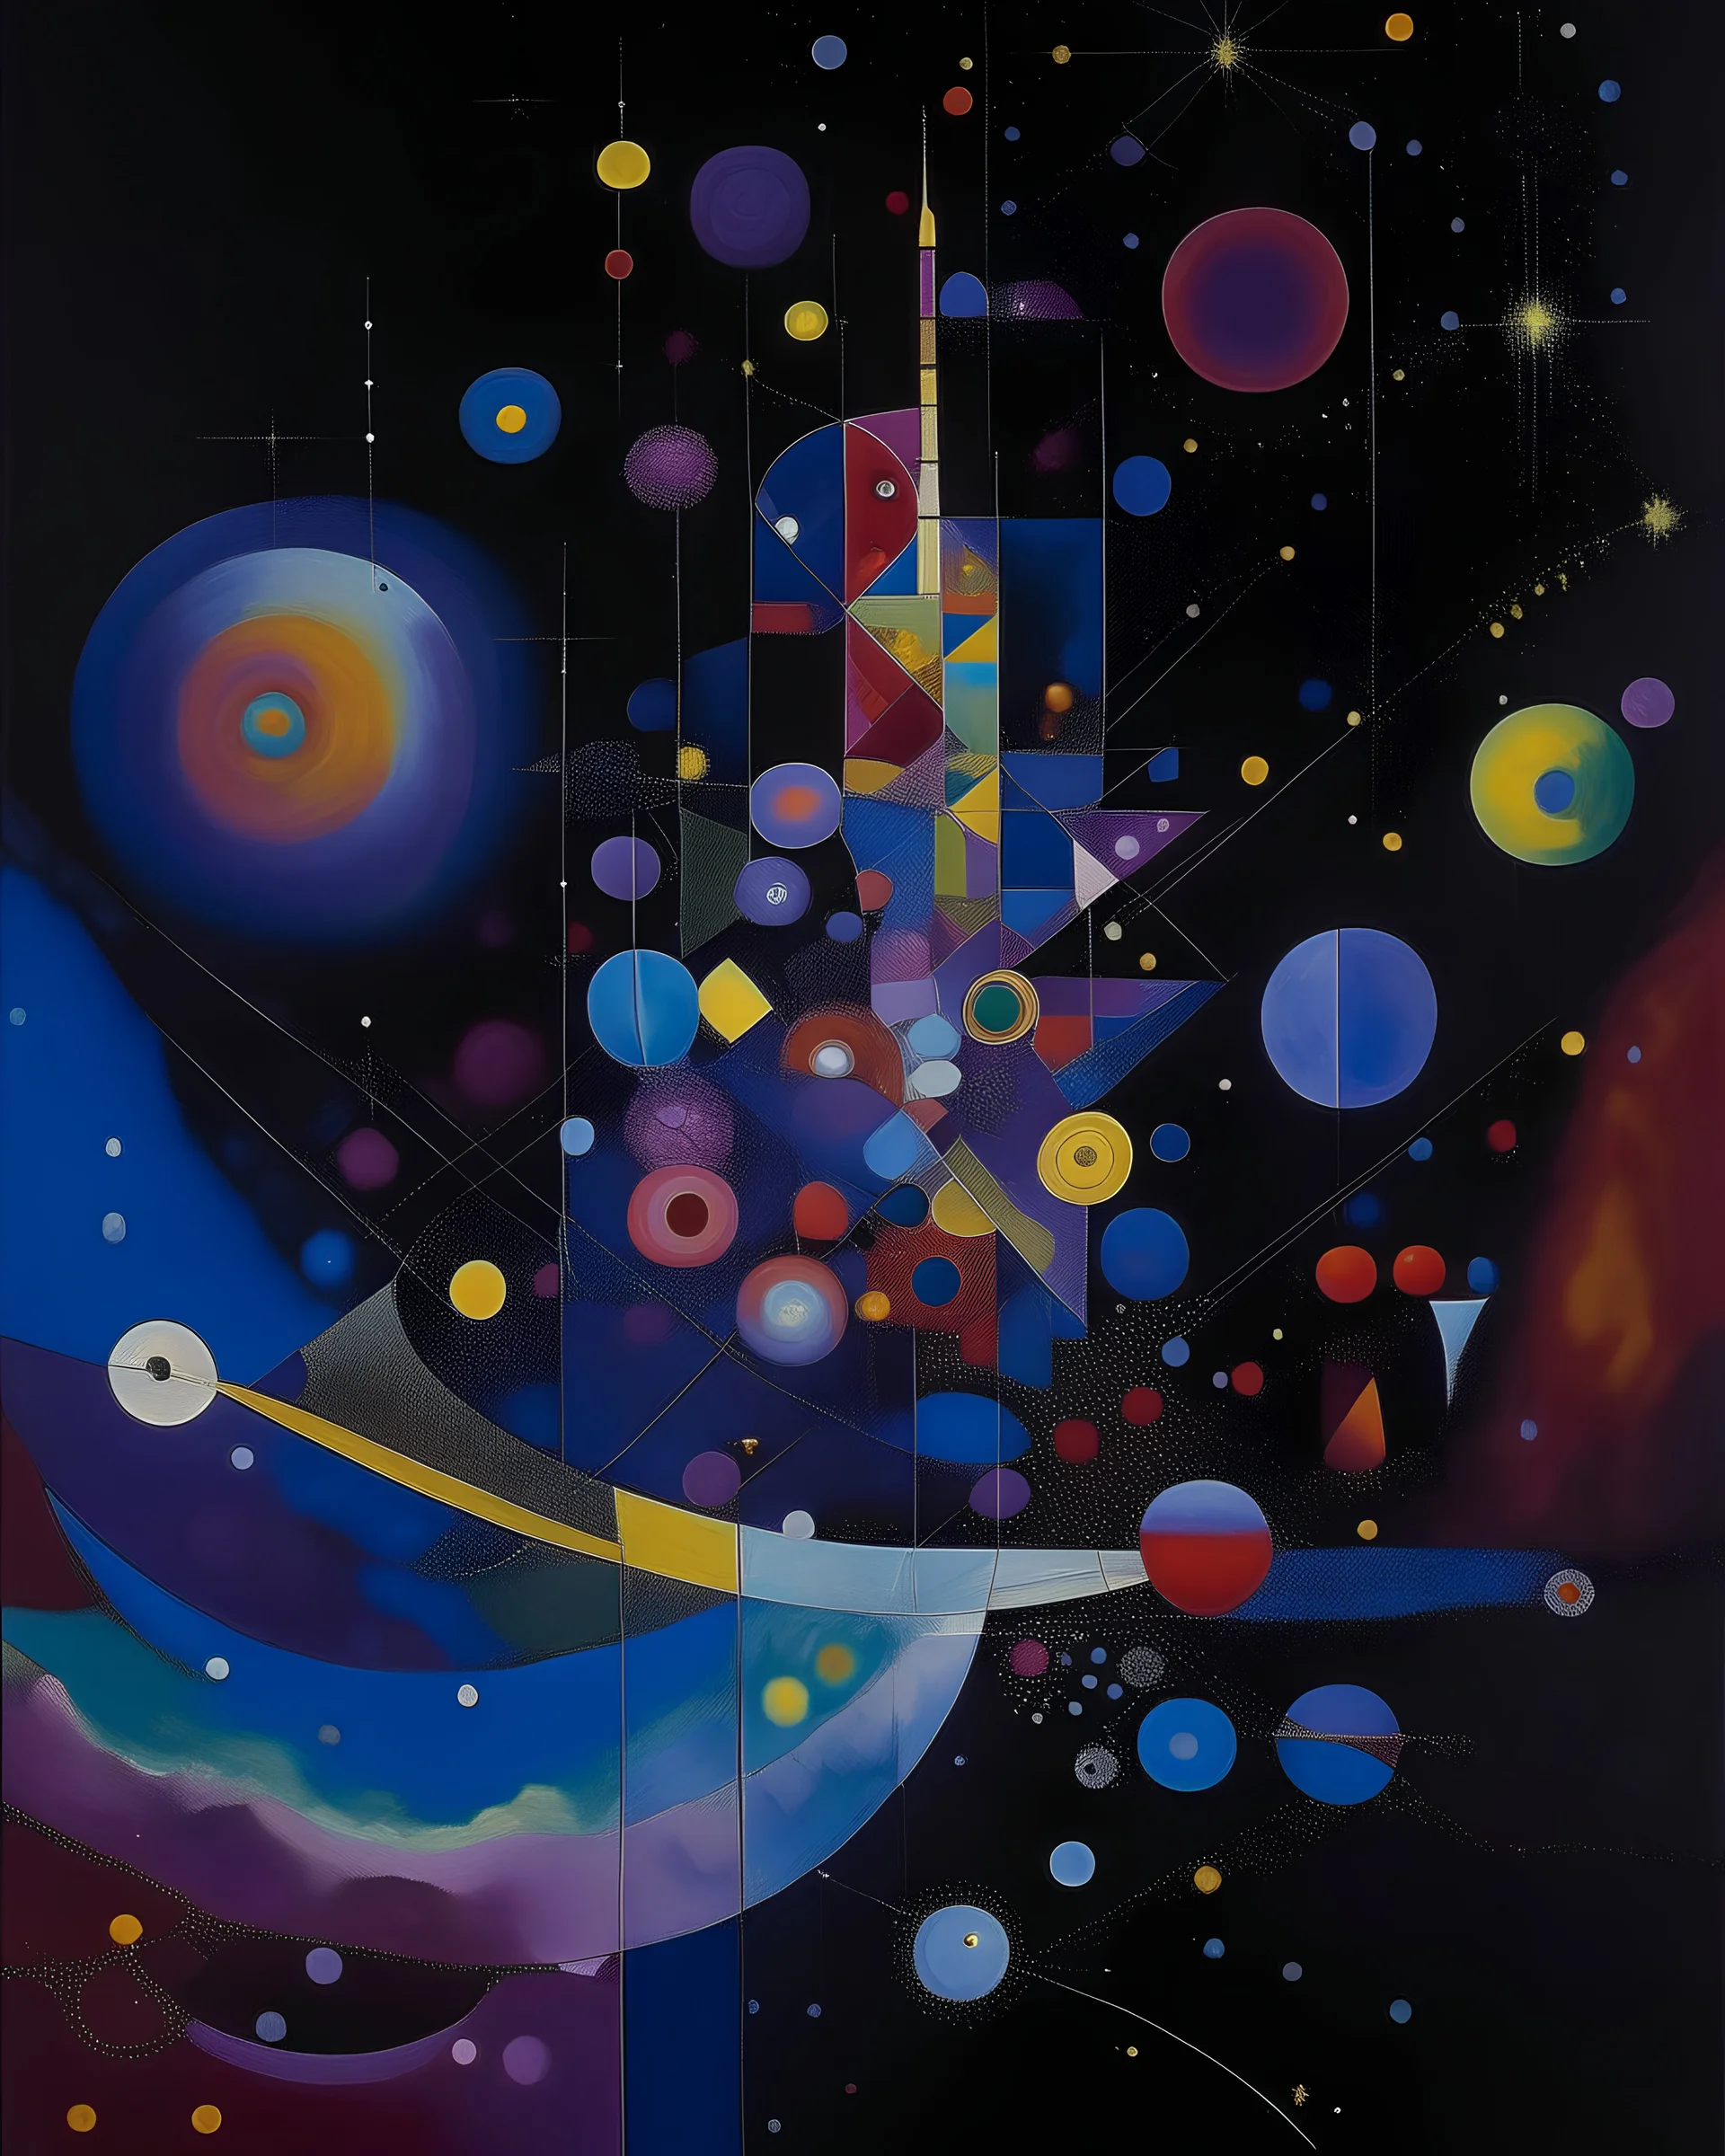 A violet space station in a galaxy filled with planets painted by Wassily Kandinsky